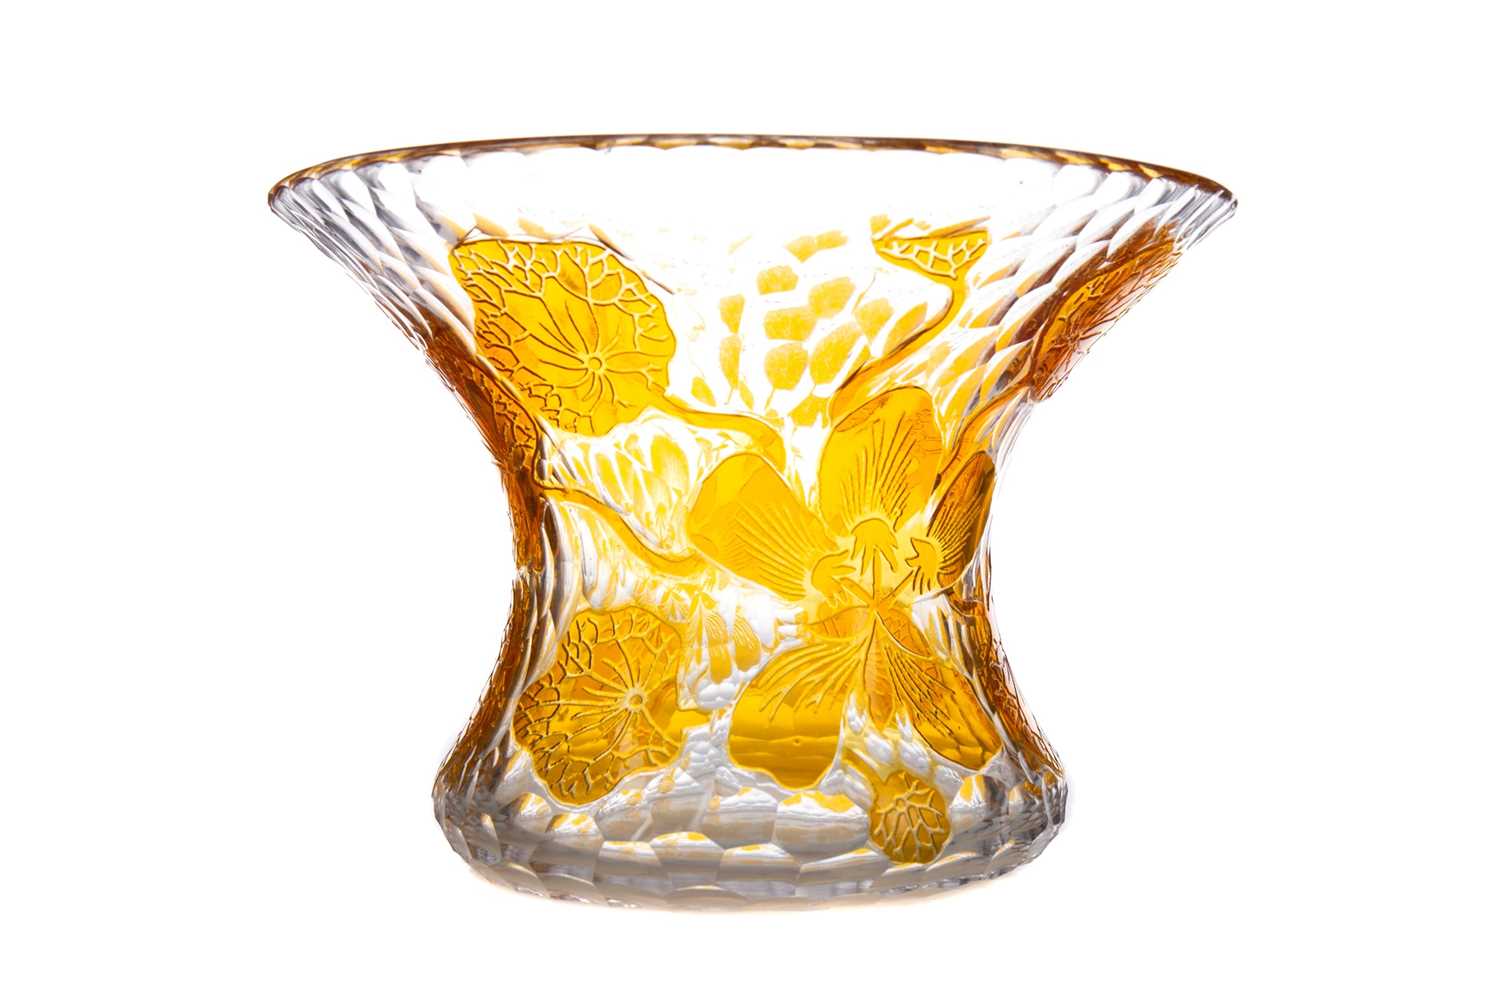 AN EARLY 20TH CENTURY CAMEO GLASS VASE